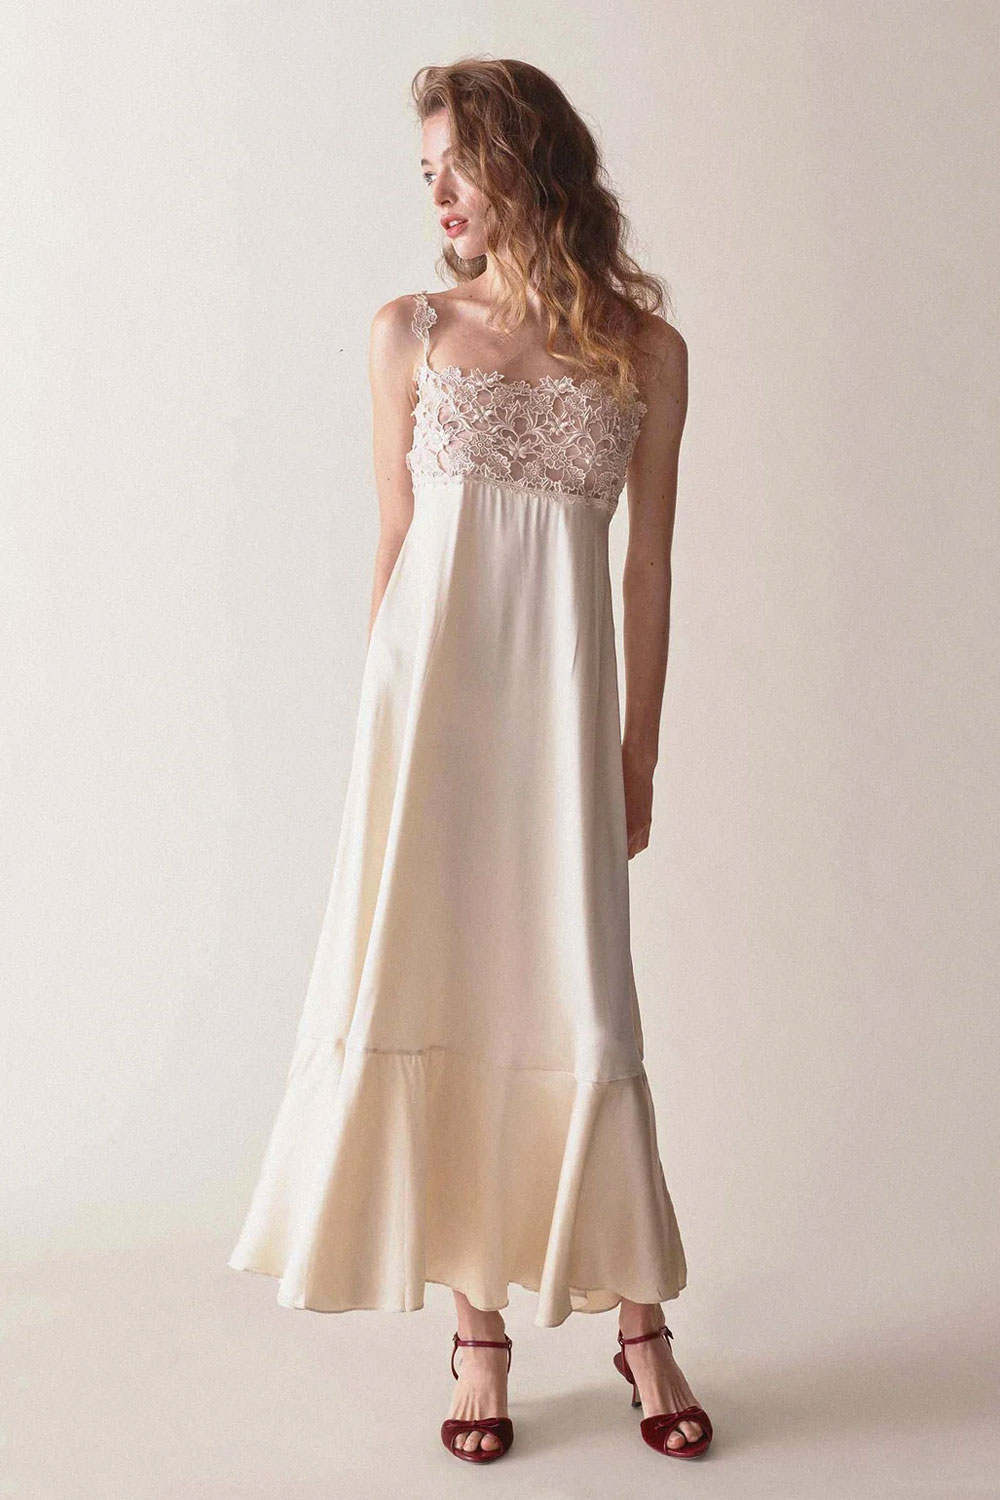 Maricel dress in mother of pearl from Doen - where to buy romantic wedding dresses online